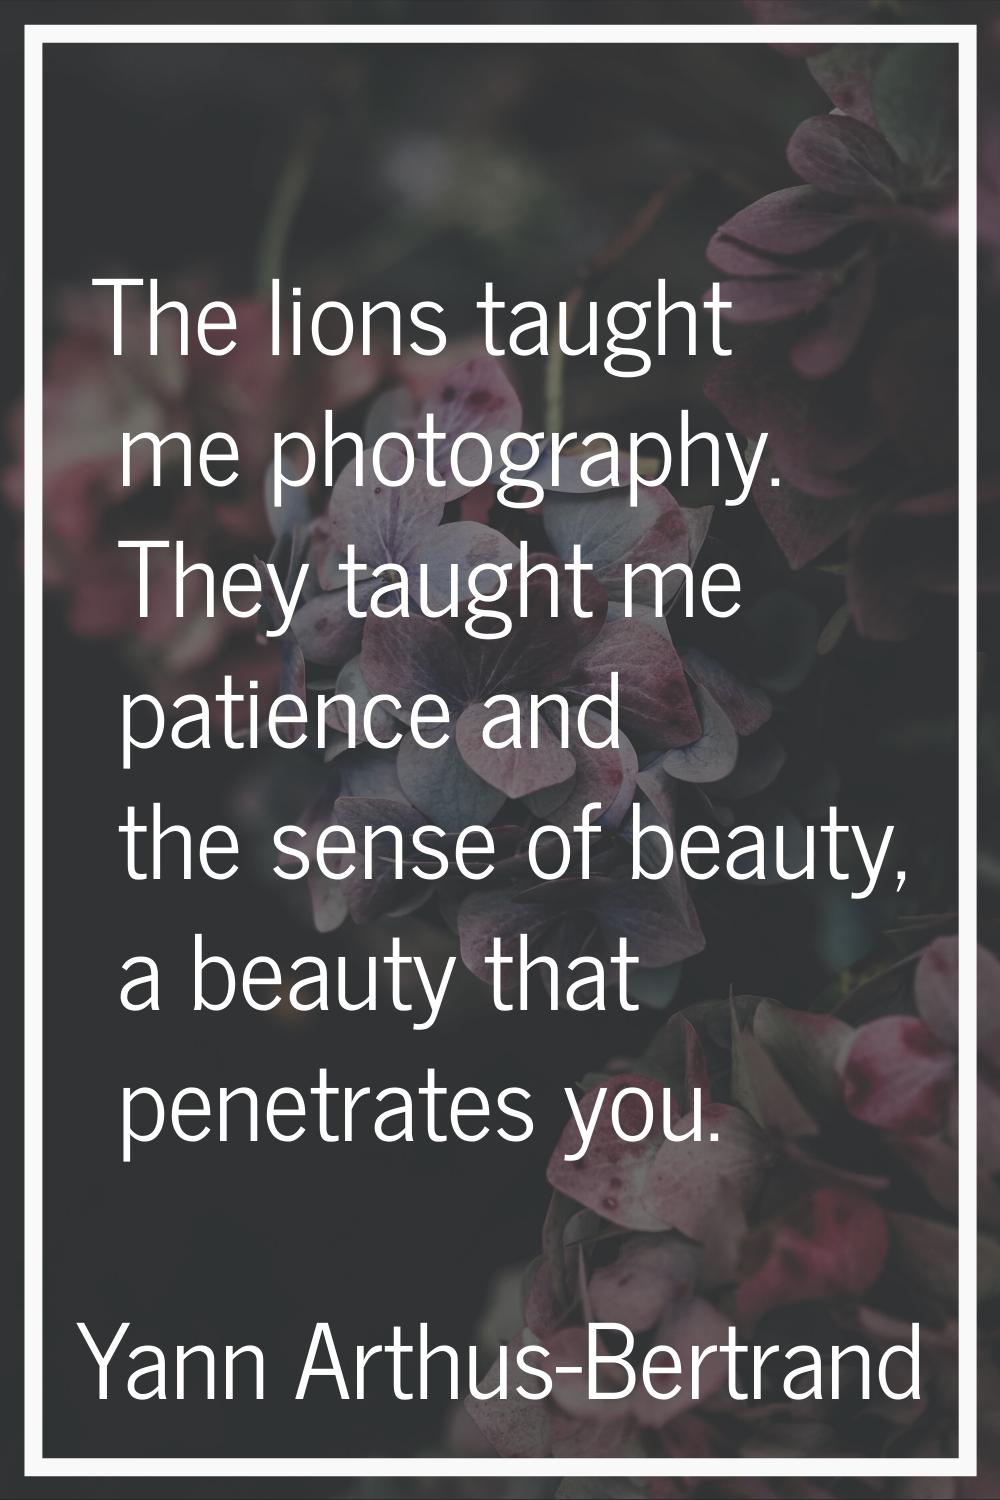 The lions taught me photography. They taught me patience and the sense of beauty, a beauty that pen